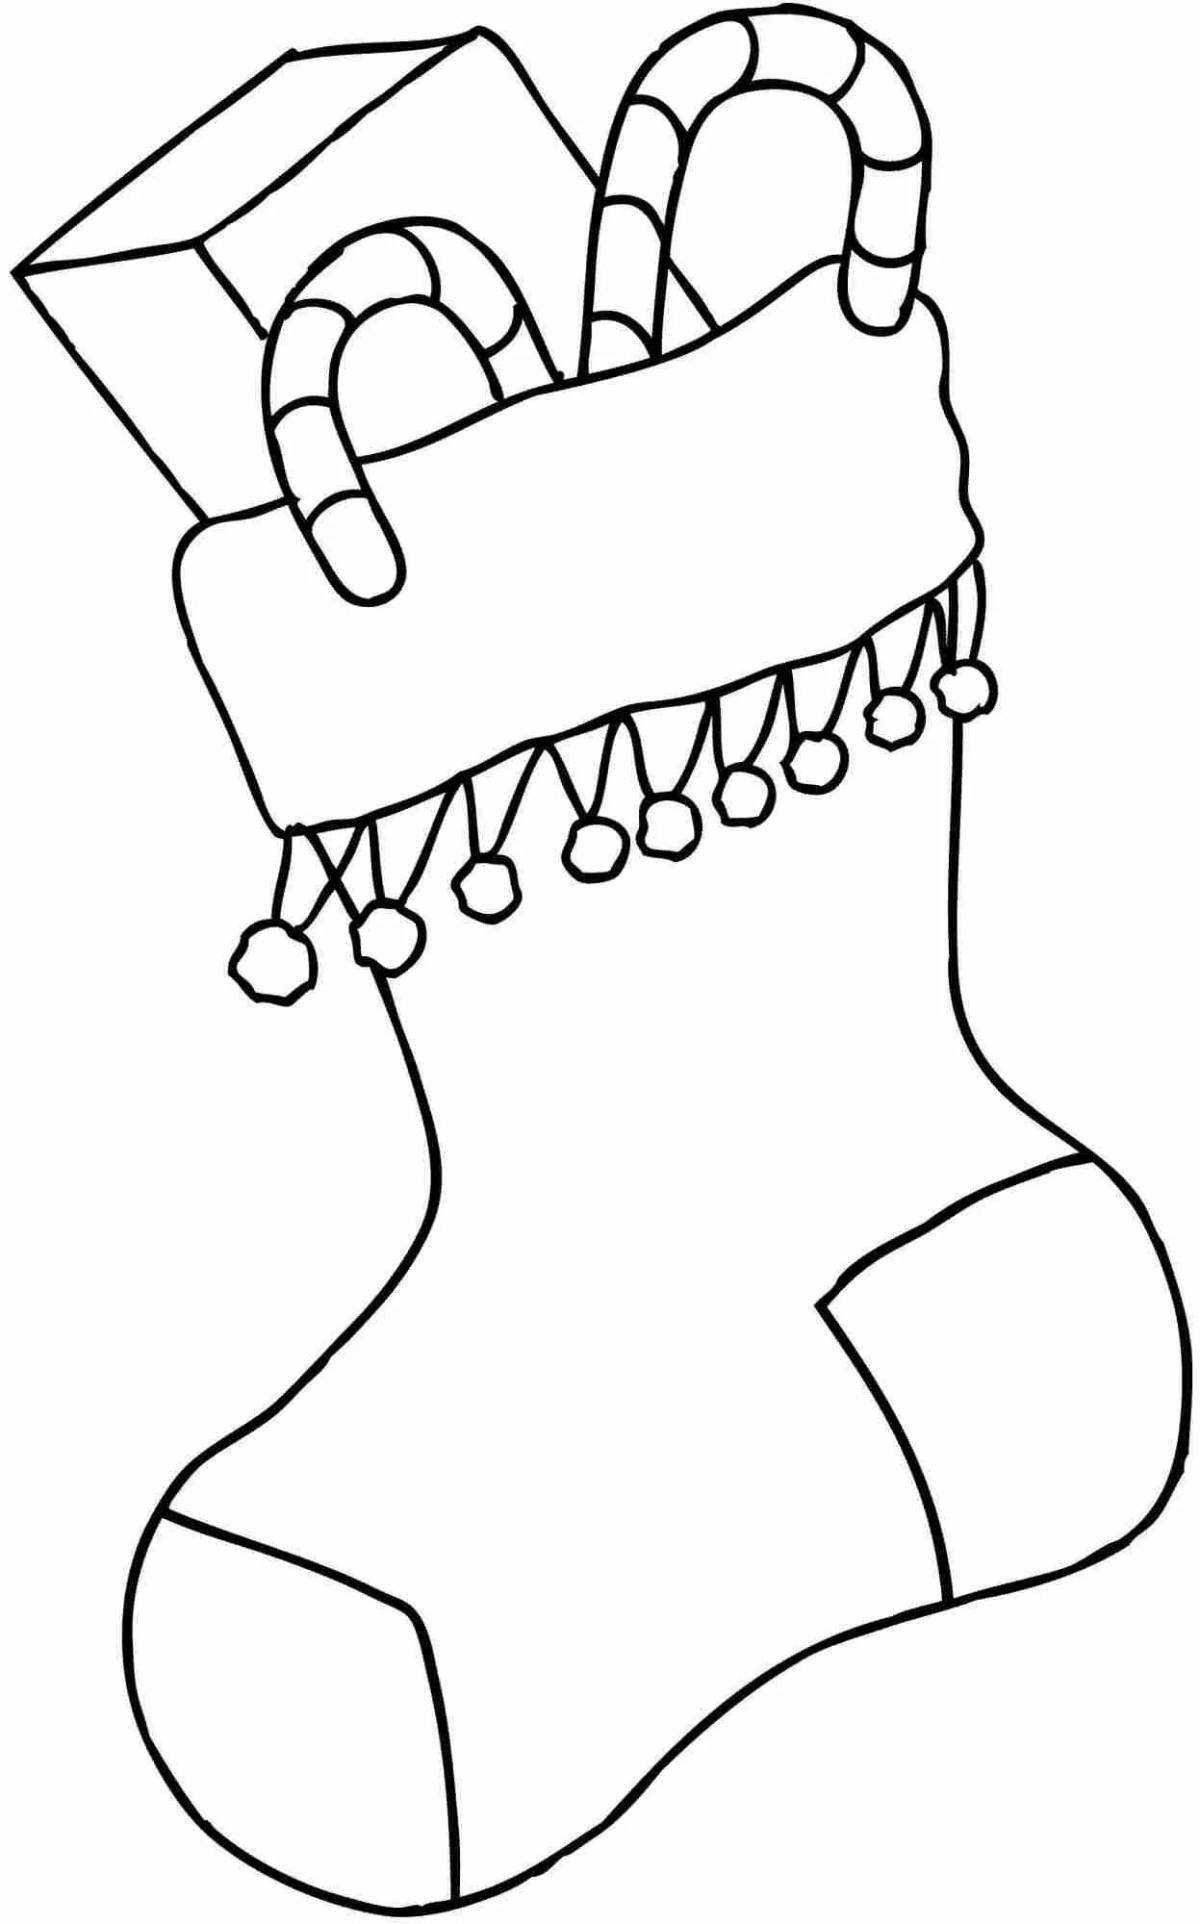 Exciting stocking coloring